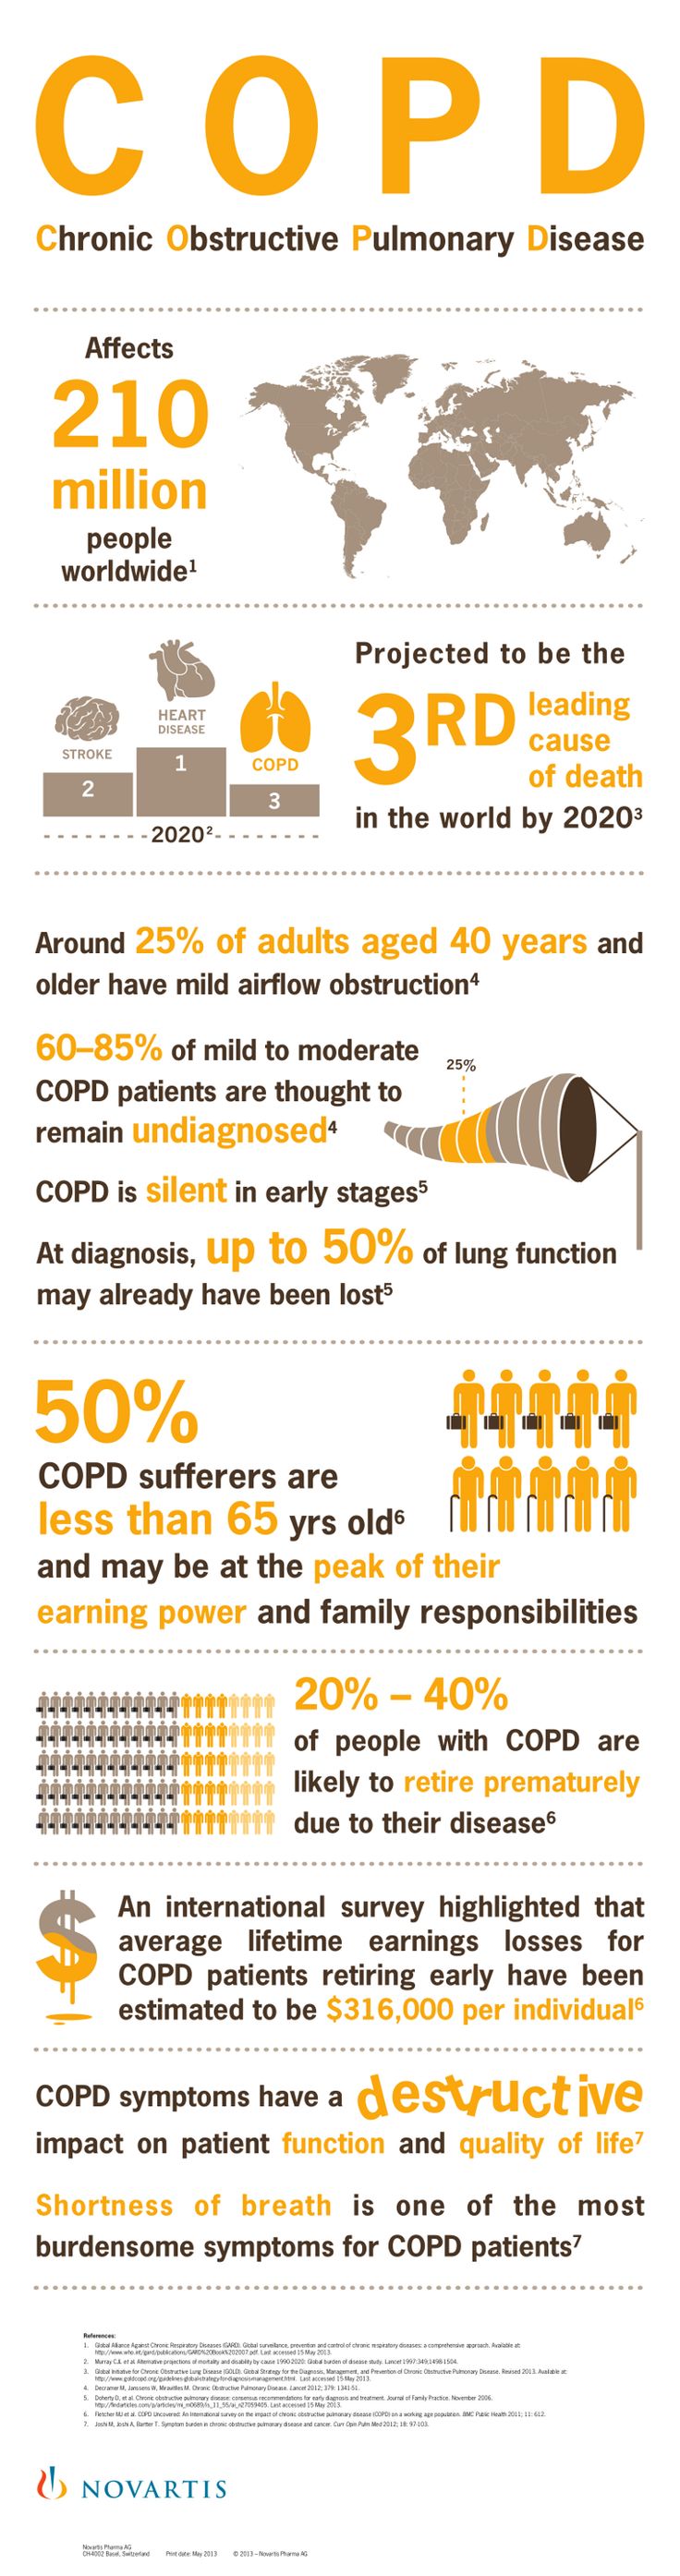 How Smart Devices Are Changing the Face of COPD